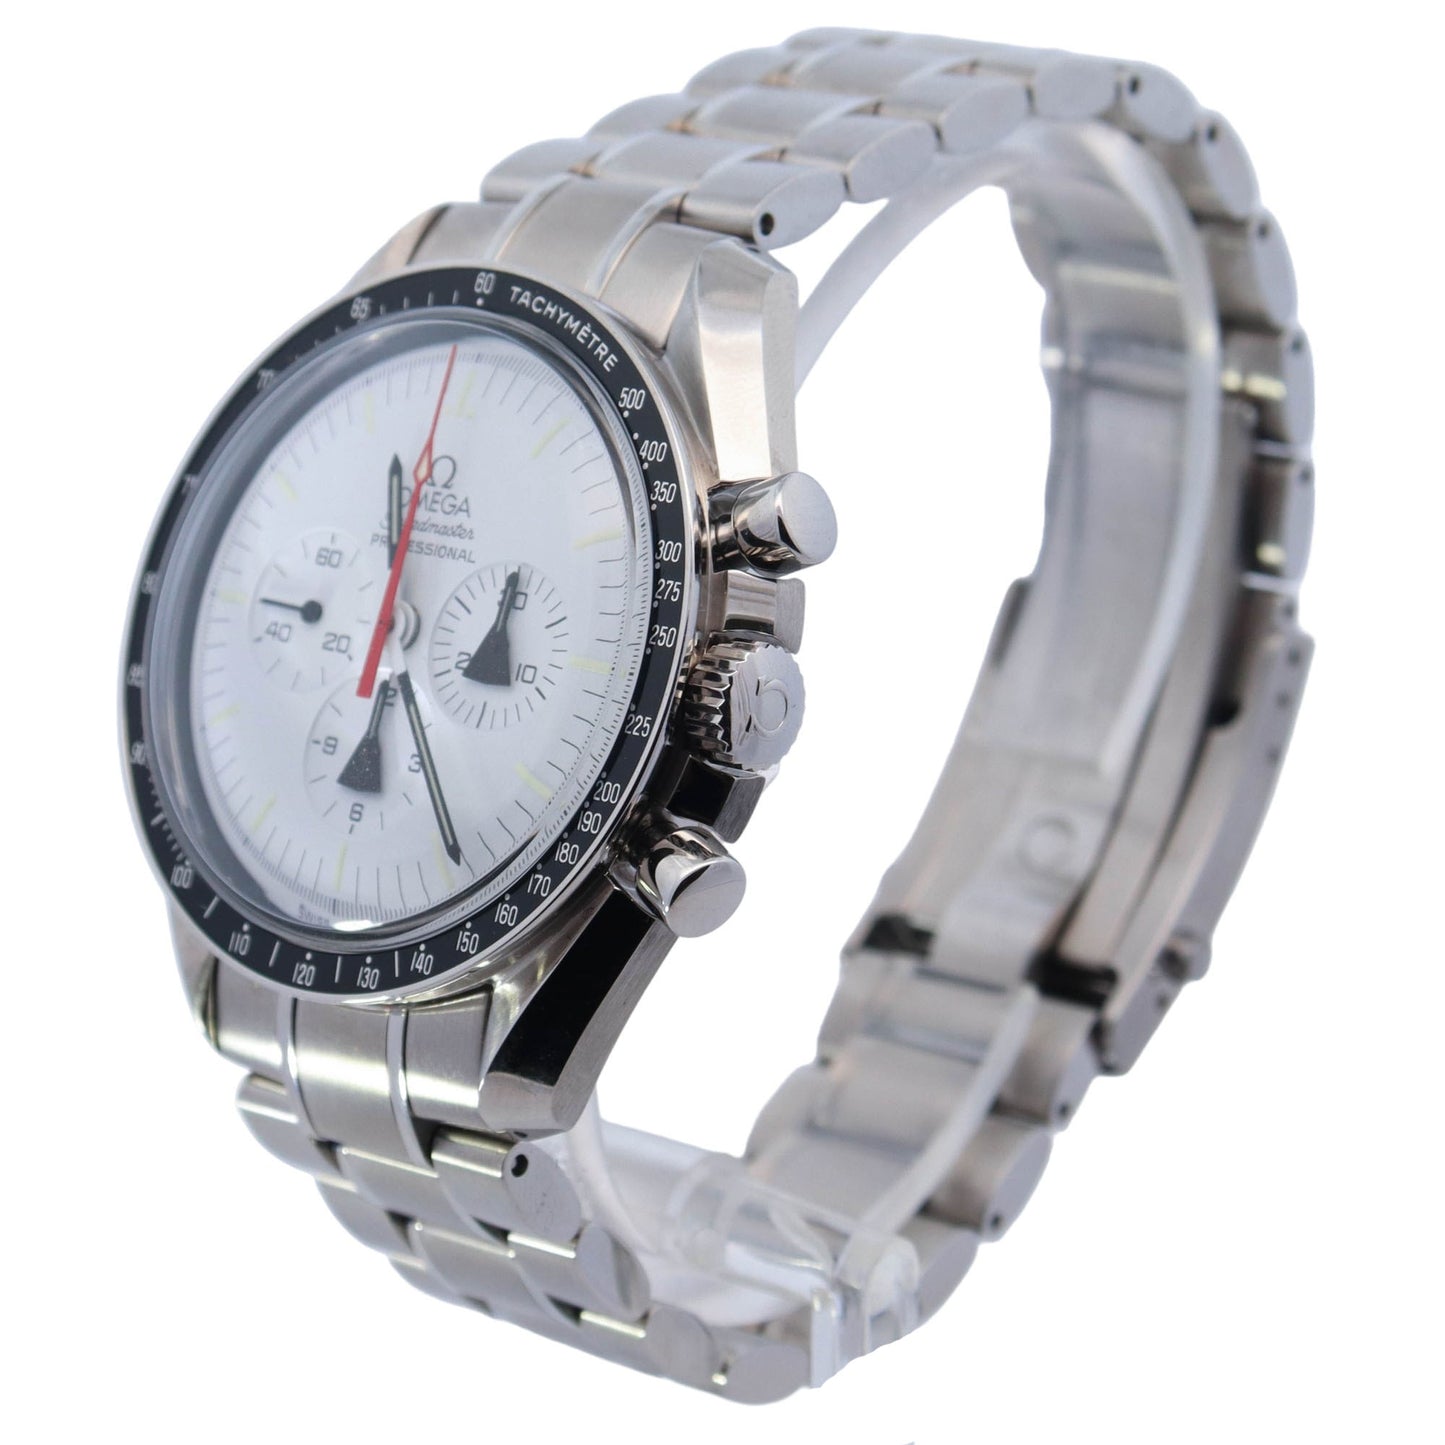 Omega Speedmaster Professional Moonswatch "Alaska Project" Stainless Steel 42mm White Chronograph Dial Watch Reference# 311.32.42.30.04.001 - Happy Jewelers Fine Jewelry Lifetime Warranty